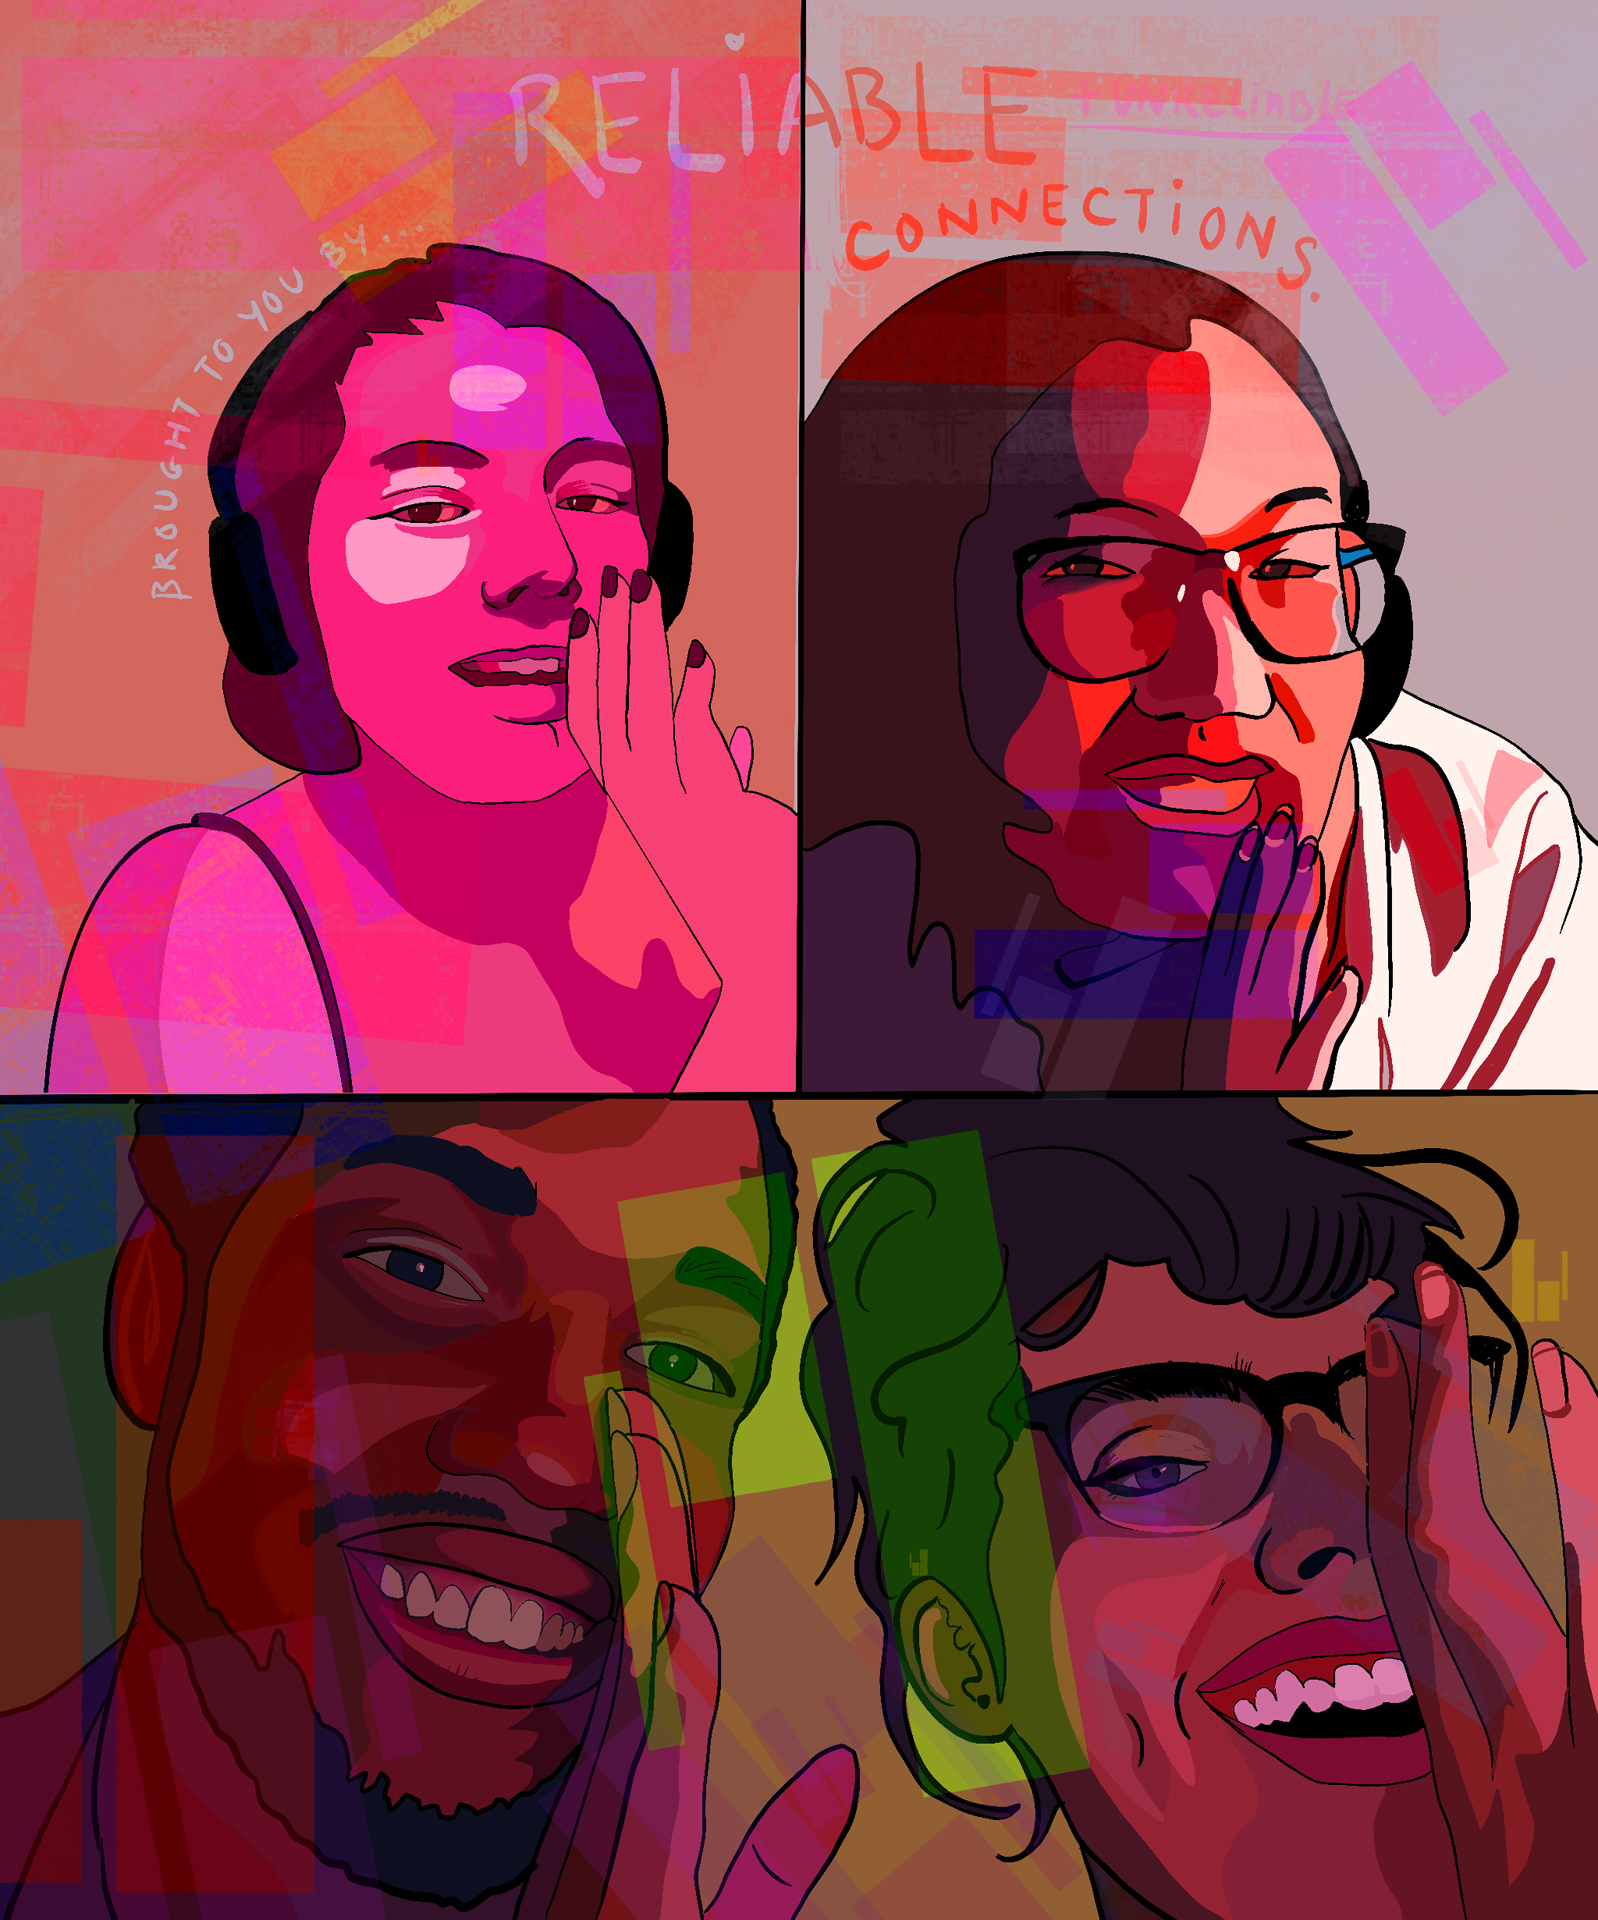 Digital illustration showing four faces in each quarter of the image with pink and green coloring